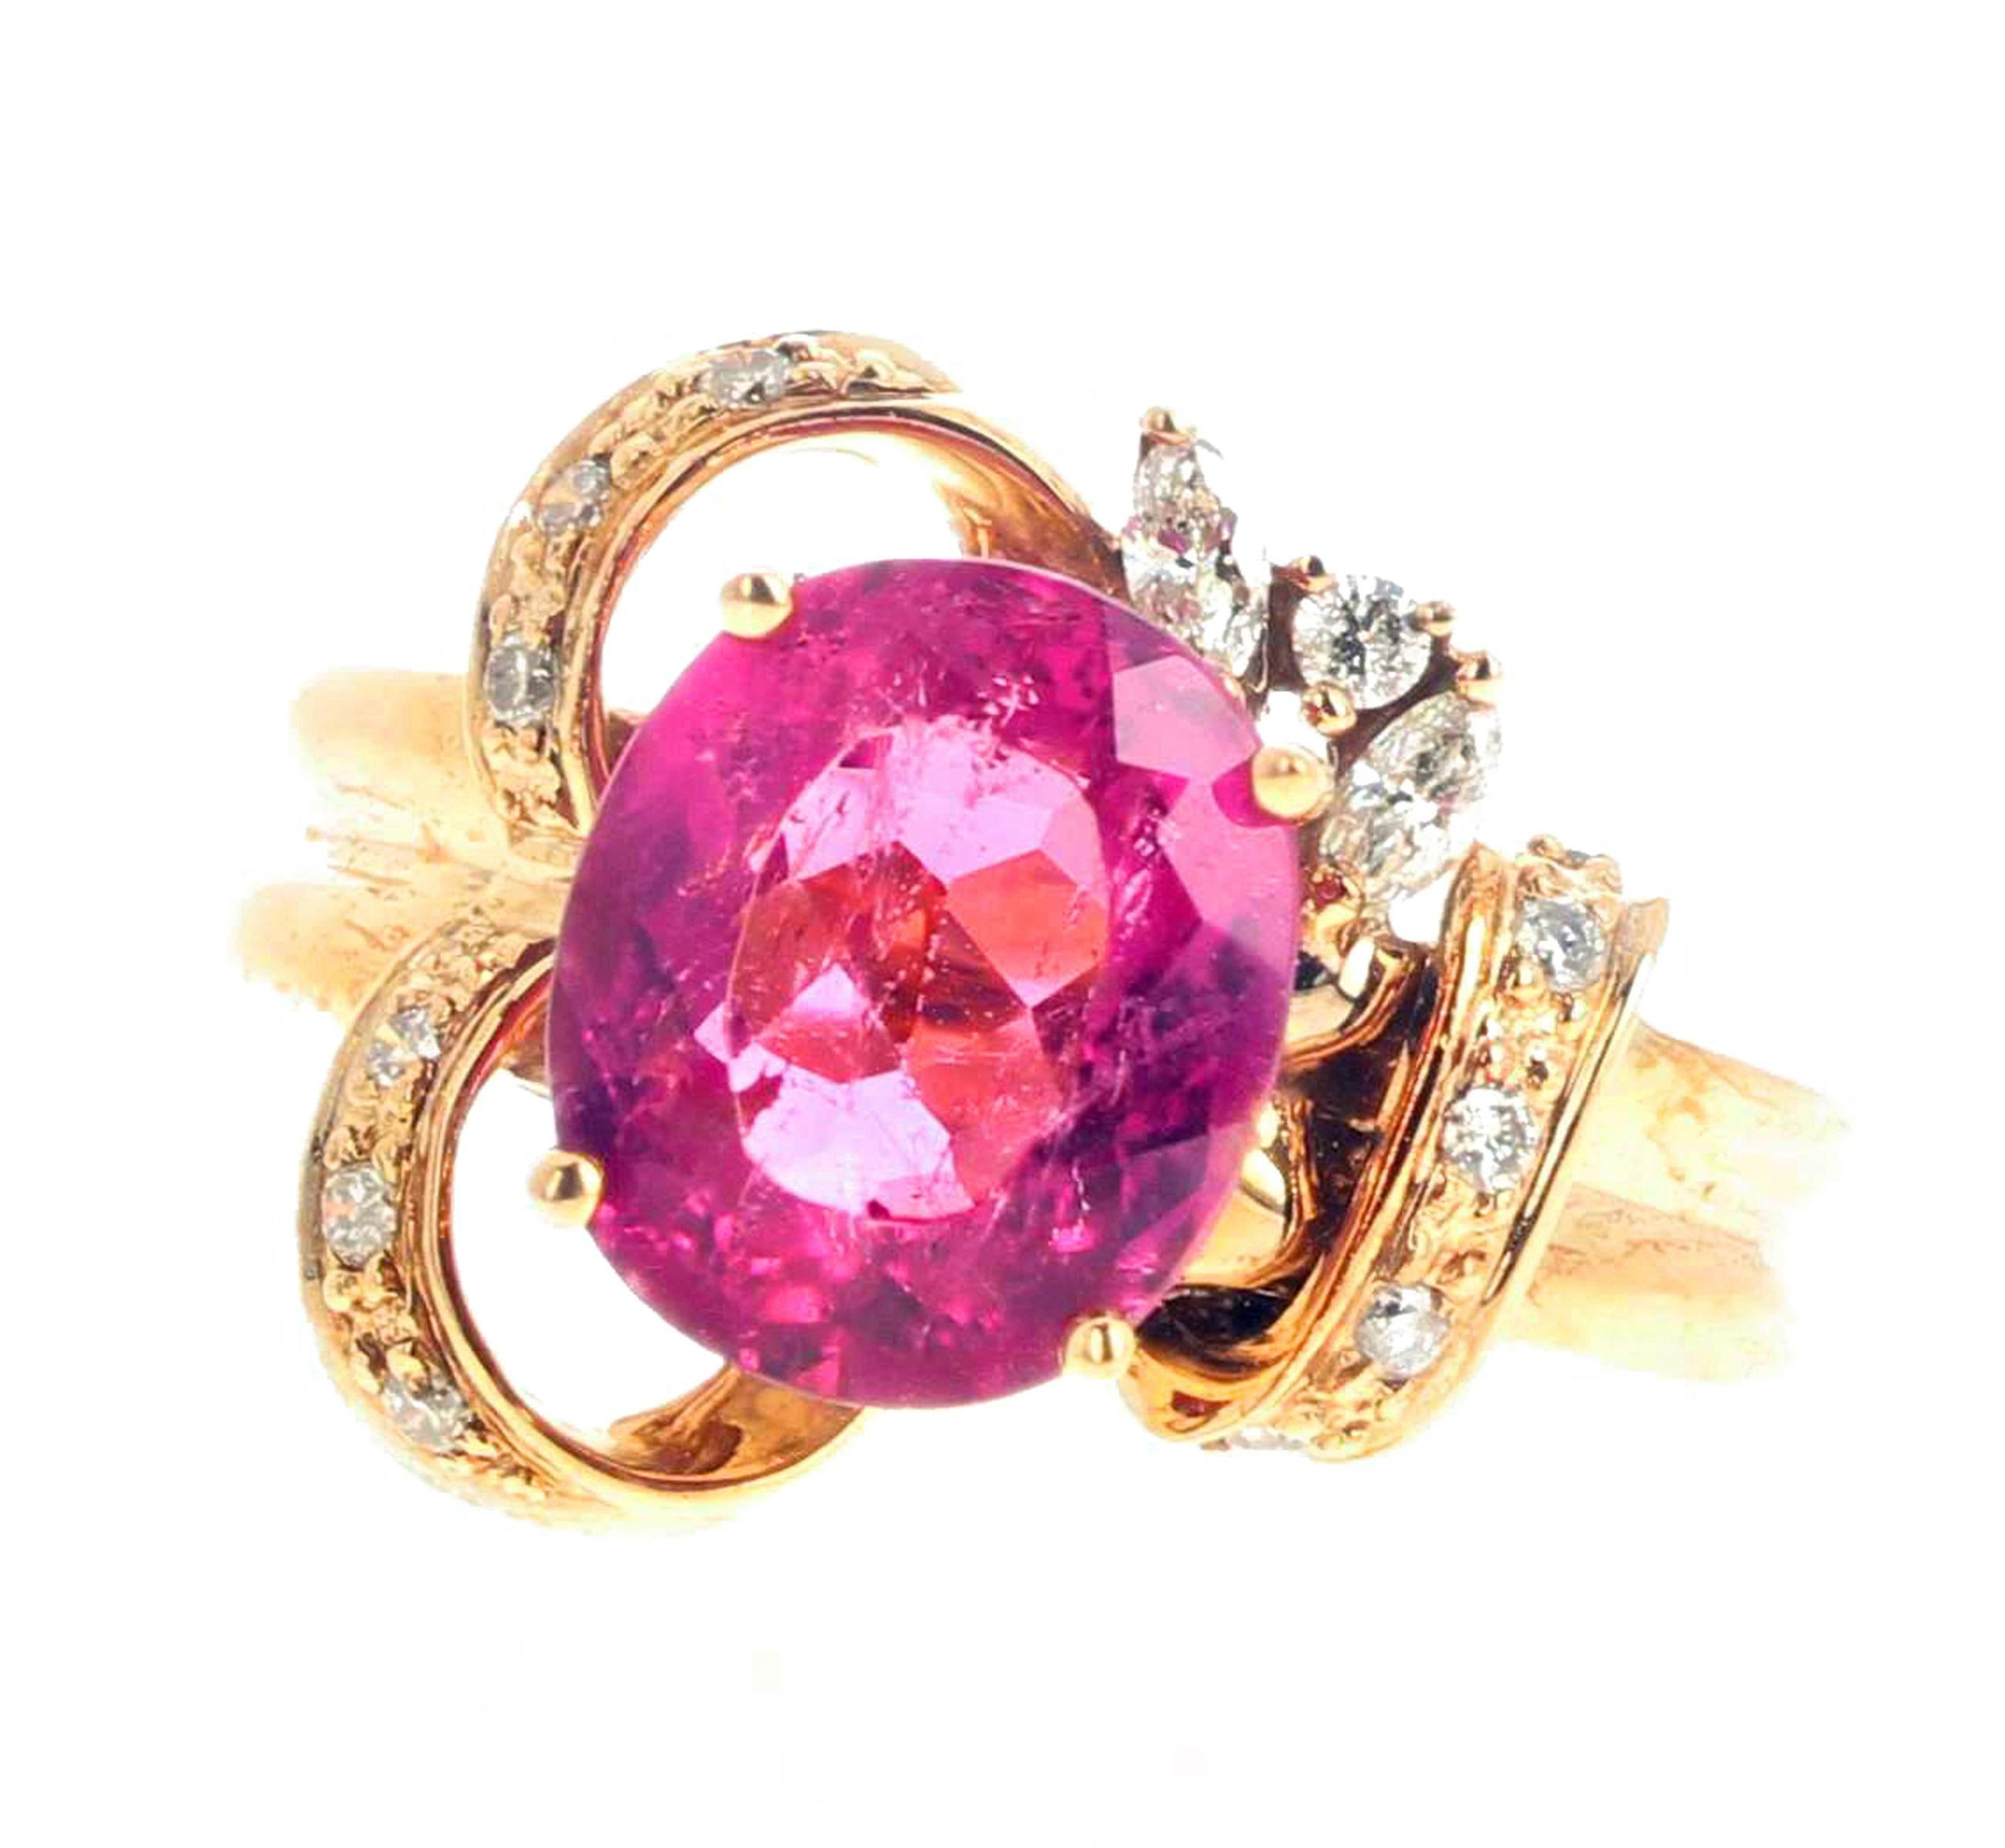 AJD Elegant Stunningly Designed 3.7 Ct. Rubelite Tourmaline & Diamonds Gold Ring In New Condition For Sale In Raleigh, NC